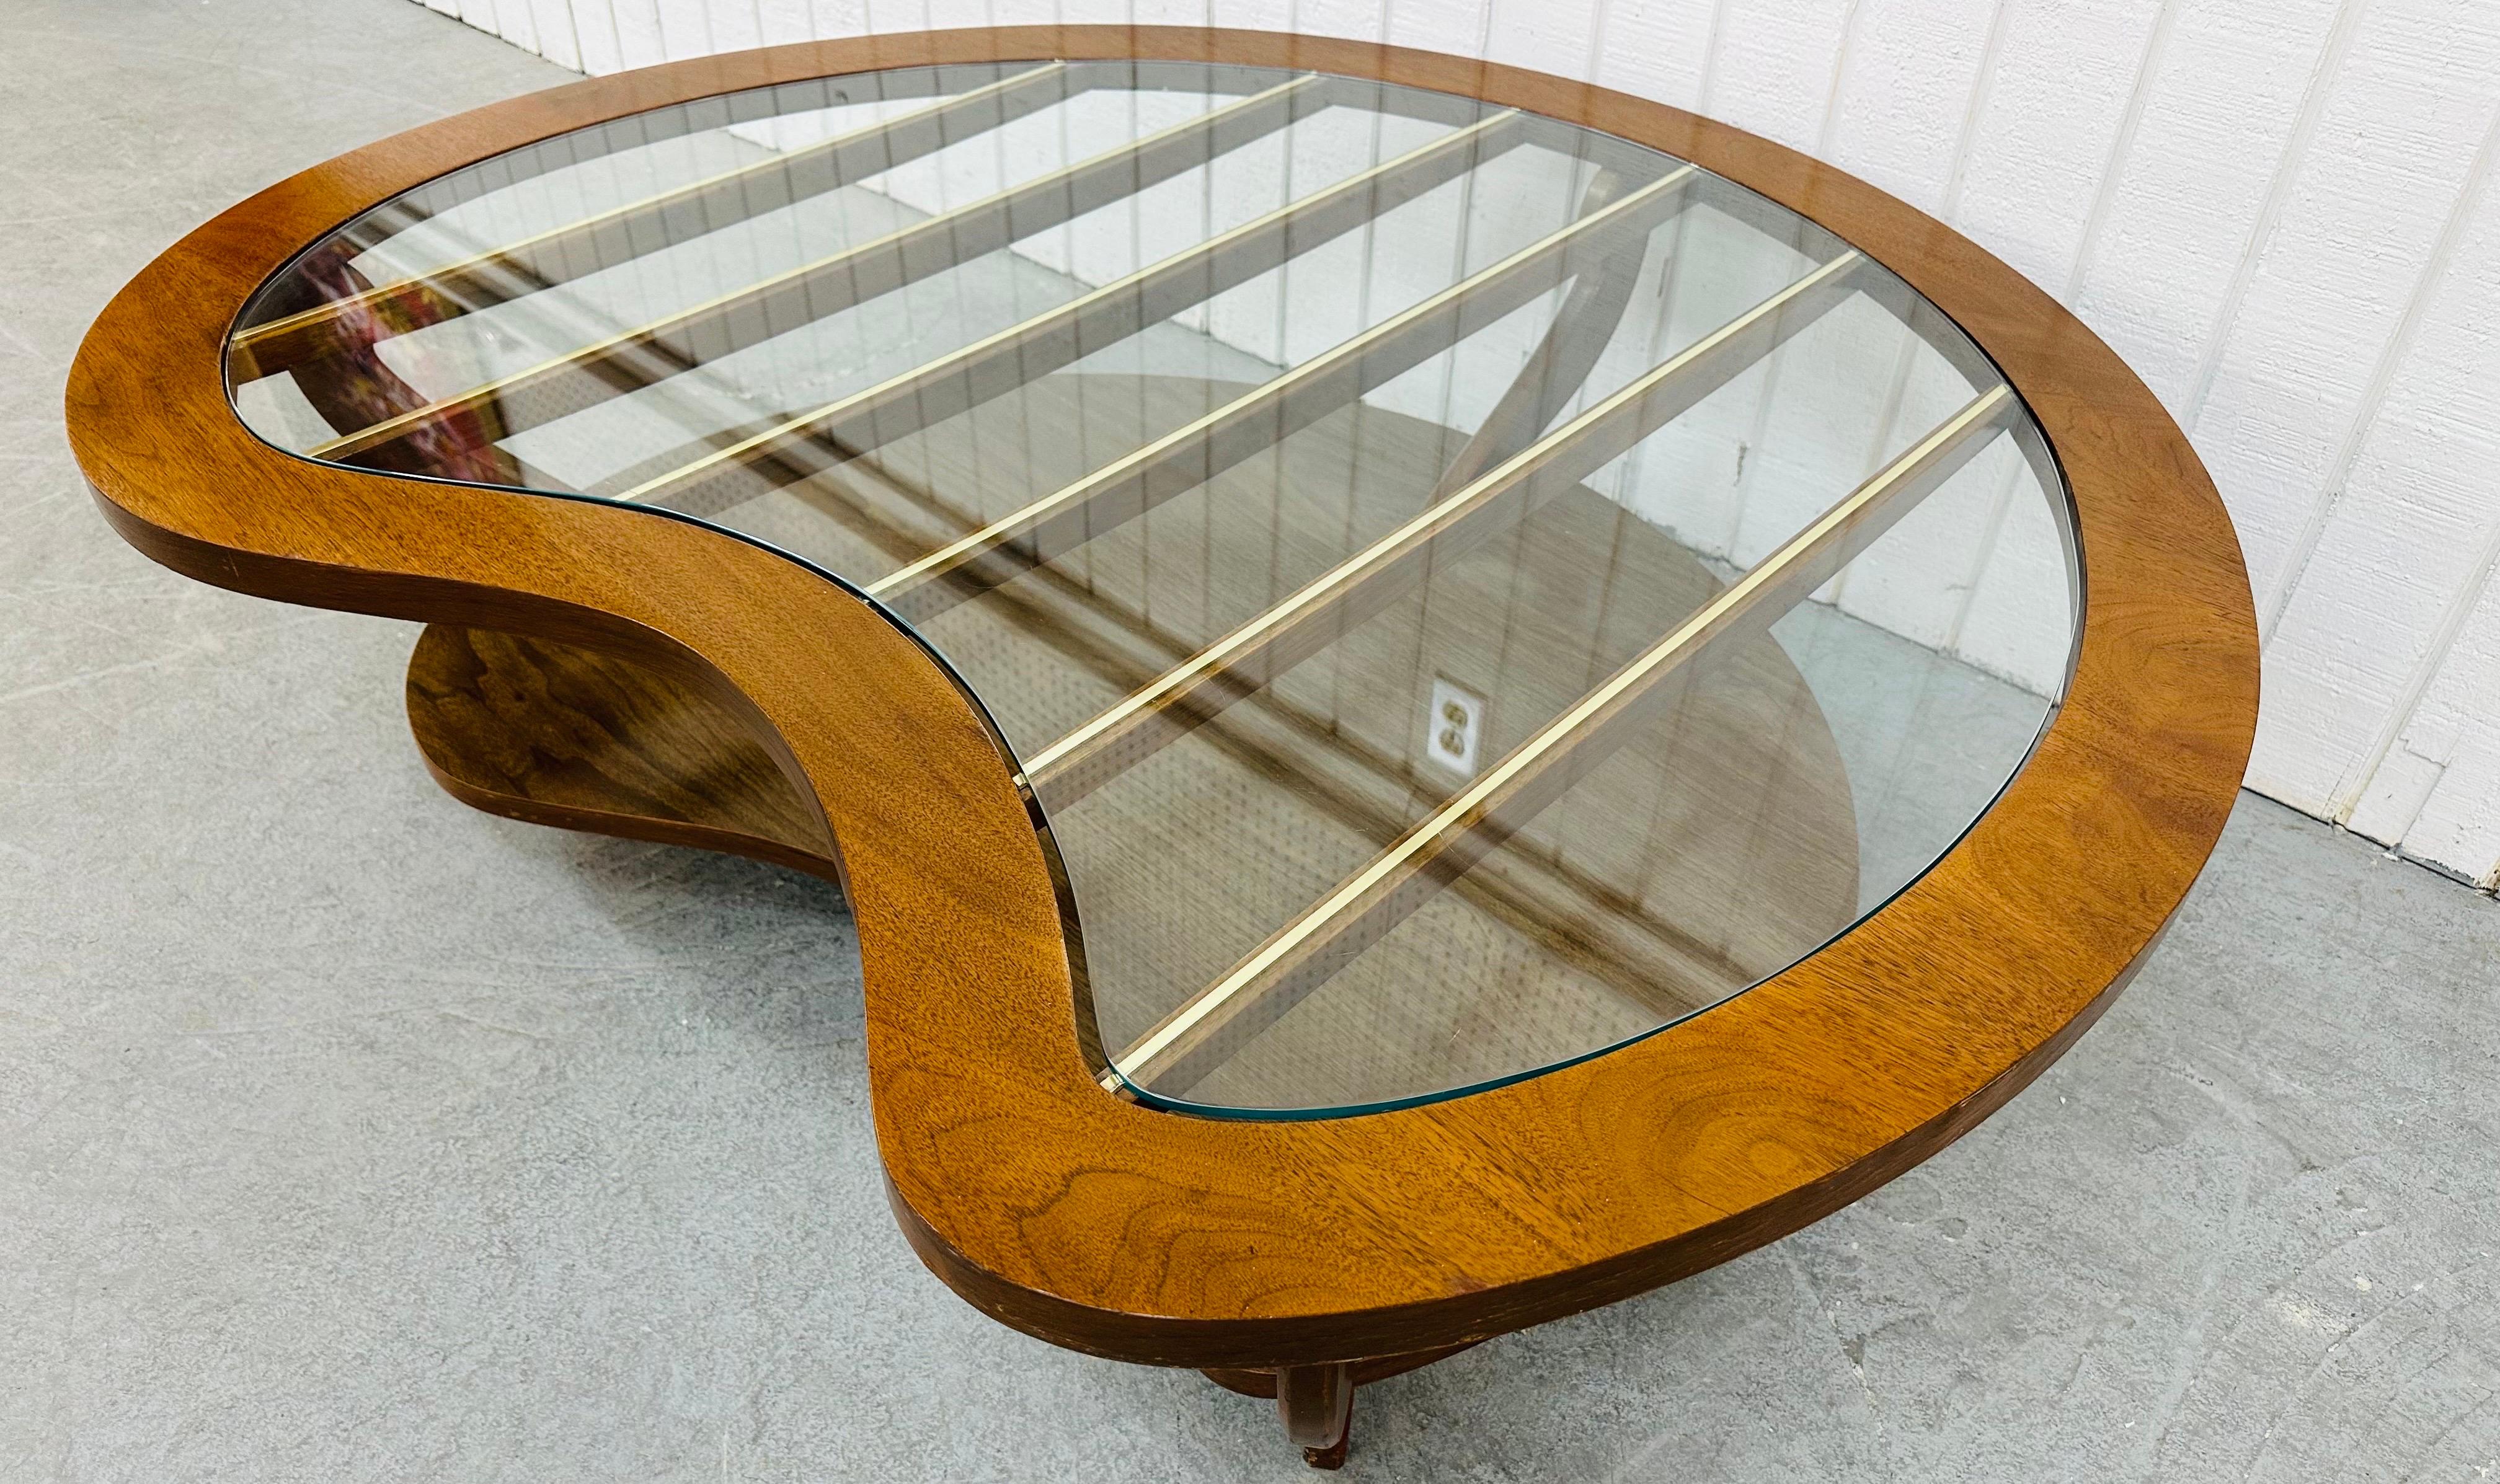 This listing is for a Mid-Century Modern Kidney Shapes Walnut Coffee Table. Featuring a kidney shaped top, glass insert, brass accented rails under the glass, a bottom tier for storage, modern legs, and a beautiful walnut finish. This is an